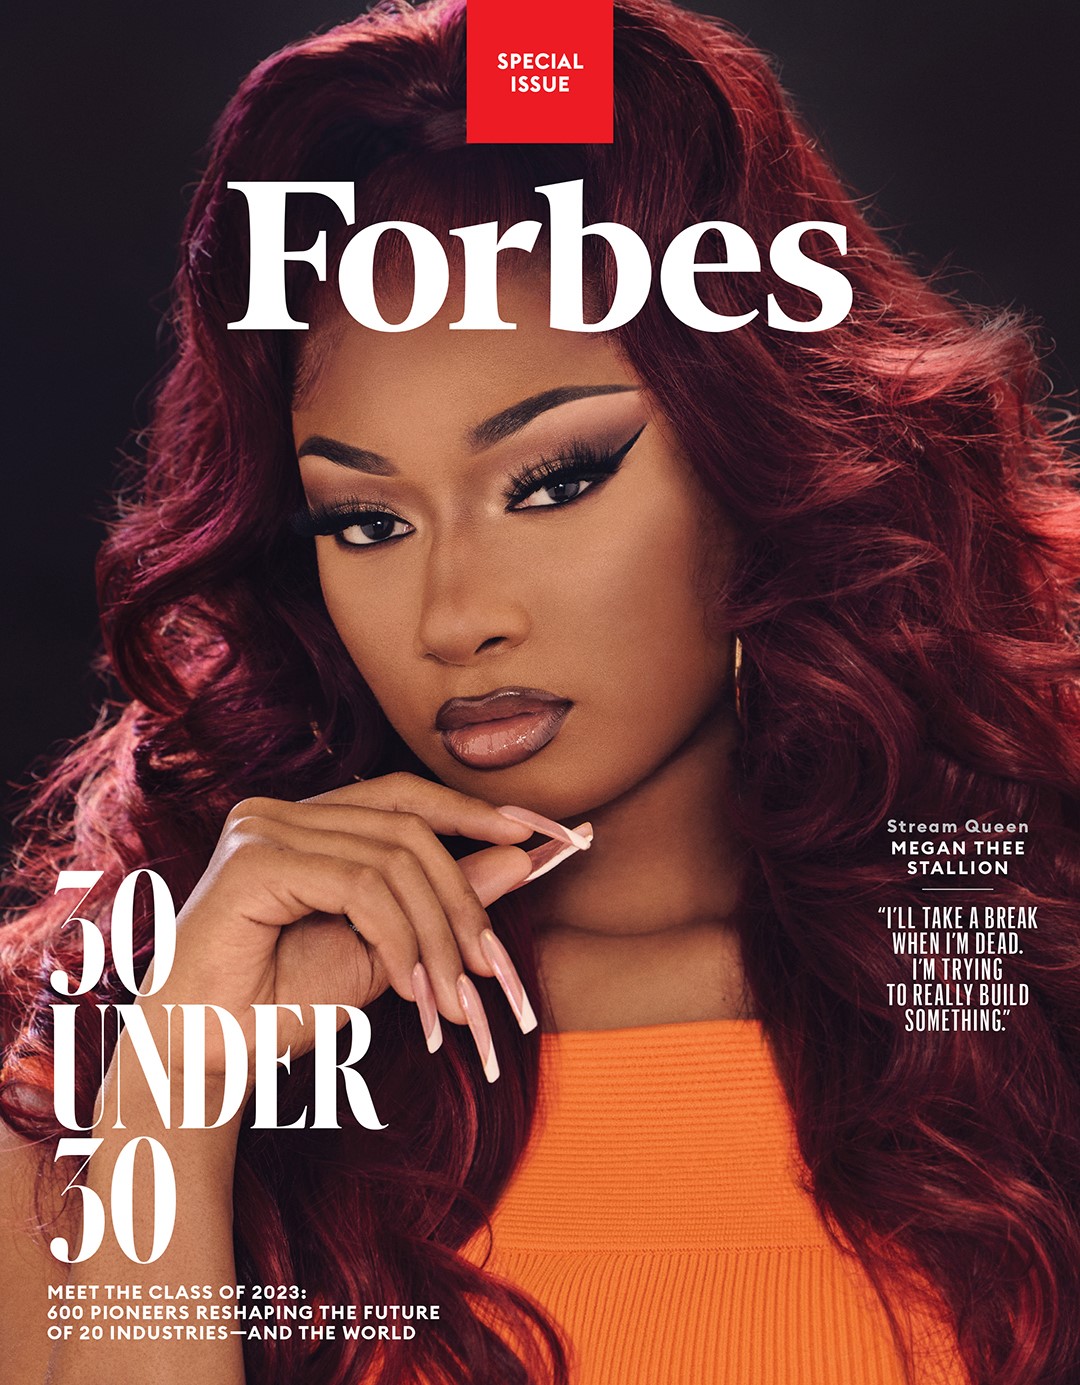 Everything You Need to Know About Megan Thee Stallion